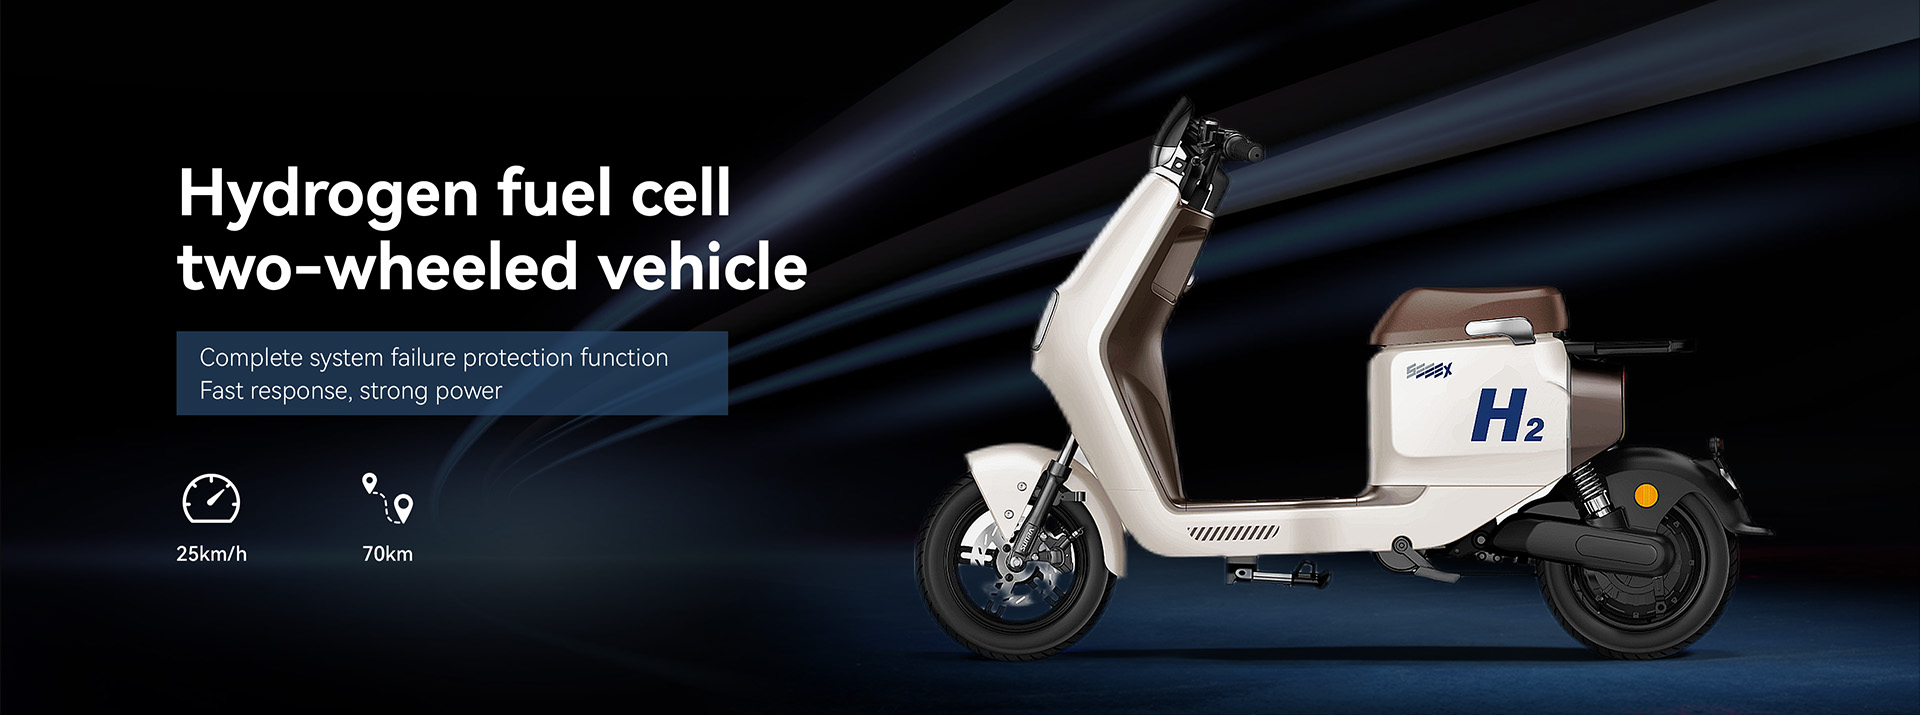 Fraunhofer suggests e-scooters as application for its magnesium hydride  paste hydrogen storage technology - Green Car Congress